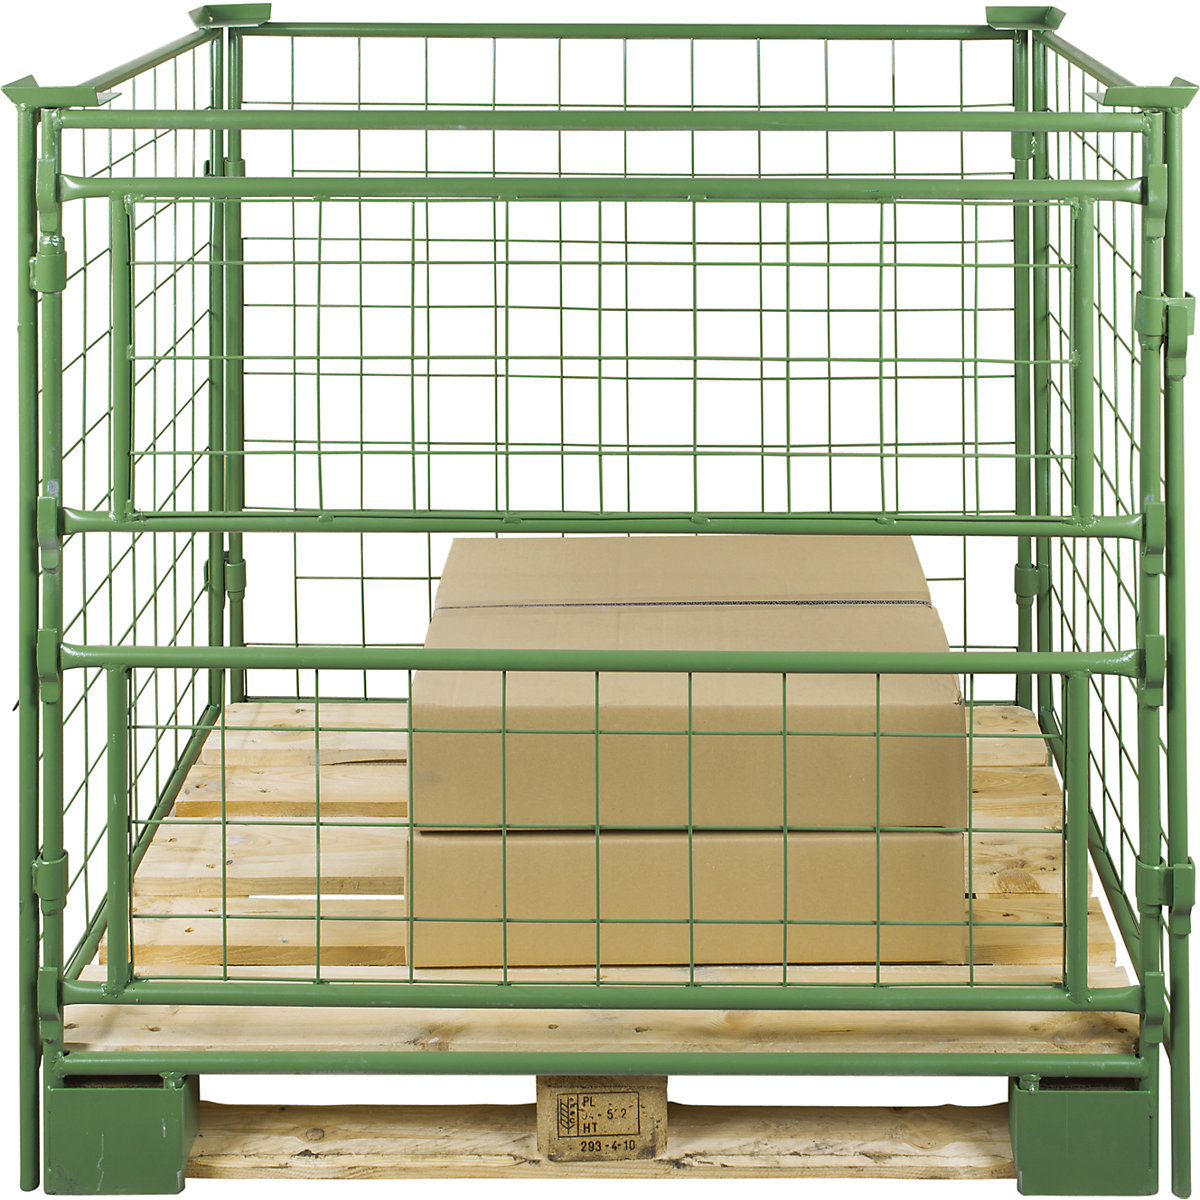 Pallet frame, effective height 1000 mm, for attaching, WxL 800 x 1200 mm, 1 long side with 2 parts, removable-1